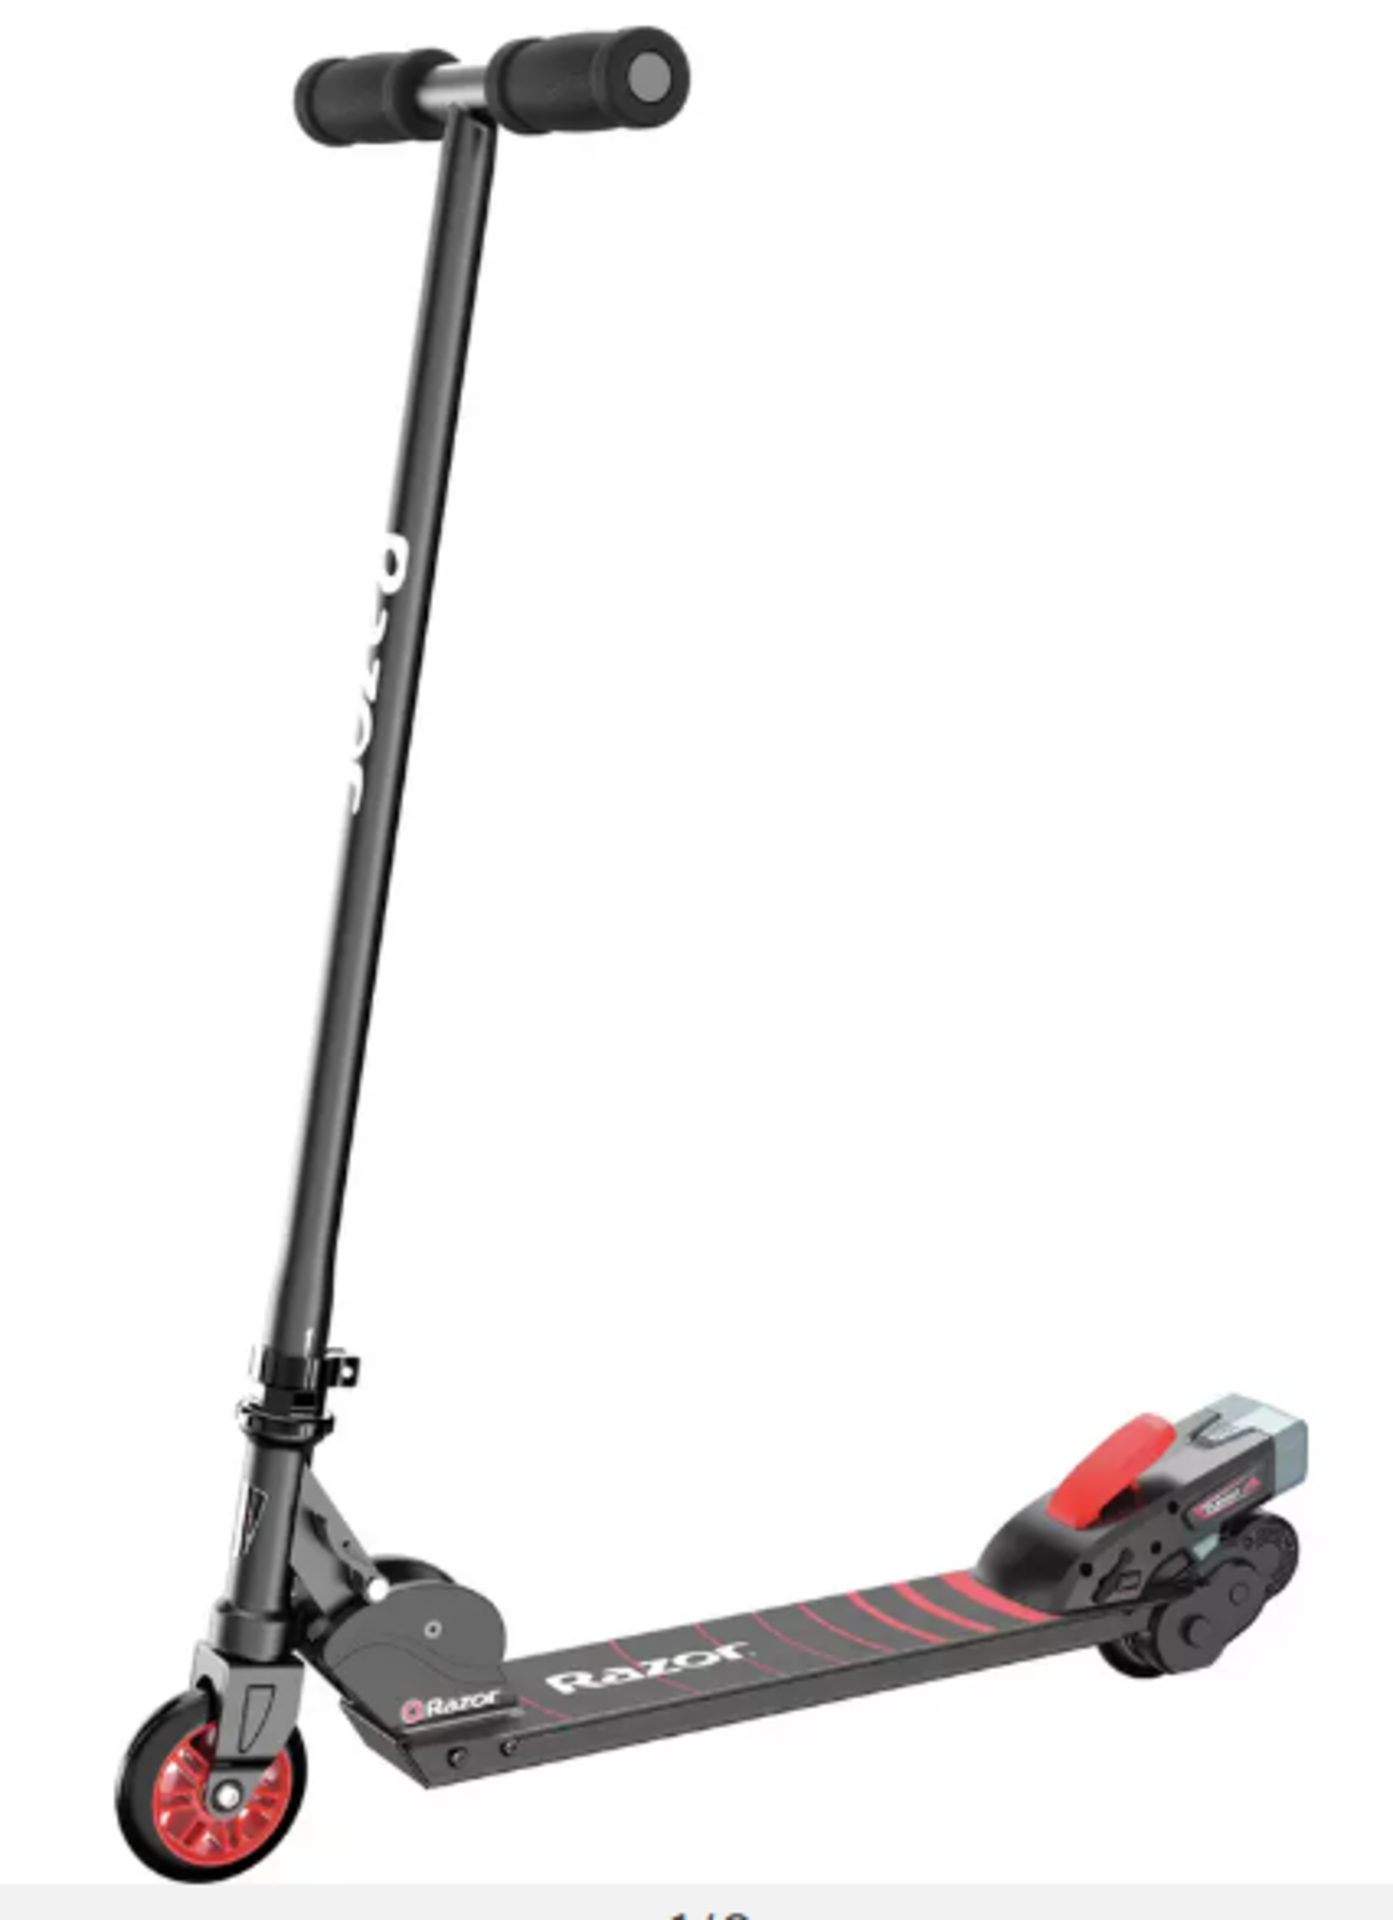 Razor Turbo A Black Label Electric Scooter. RRP £155.00. Simply step on and kick off to activate the